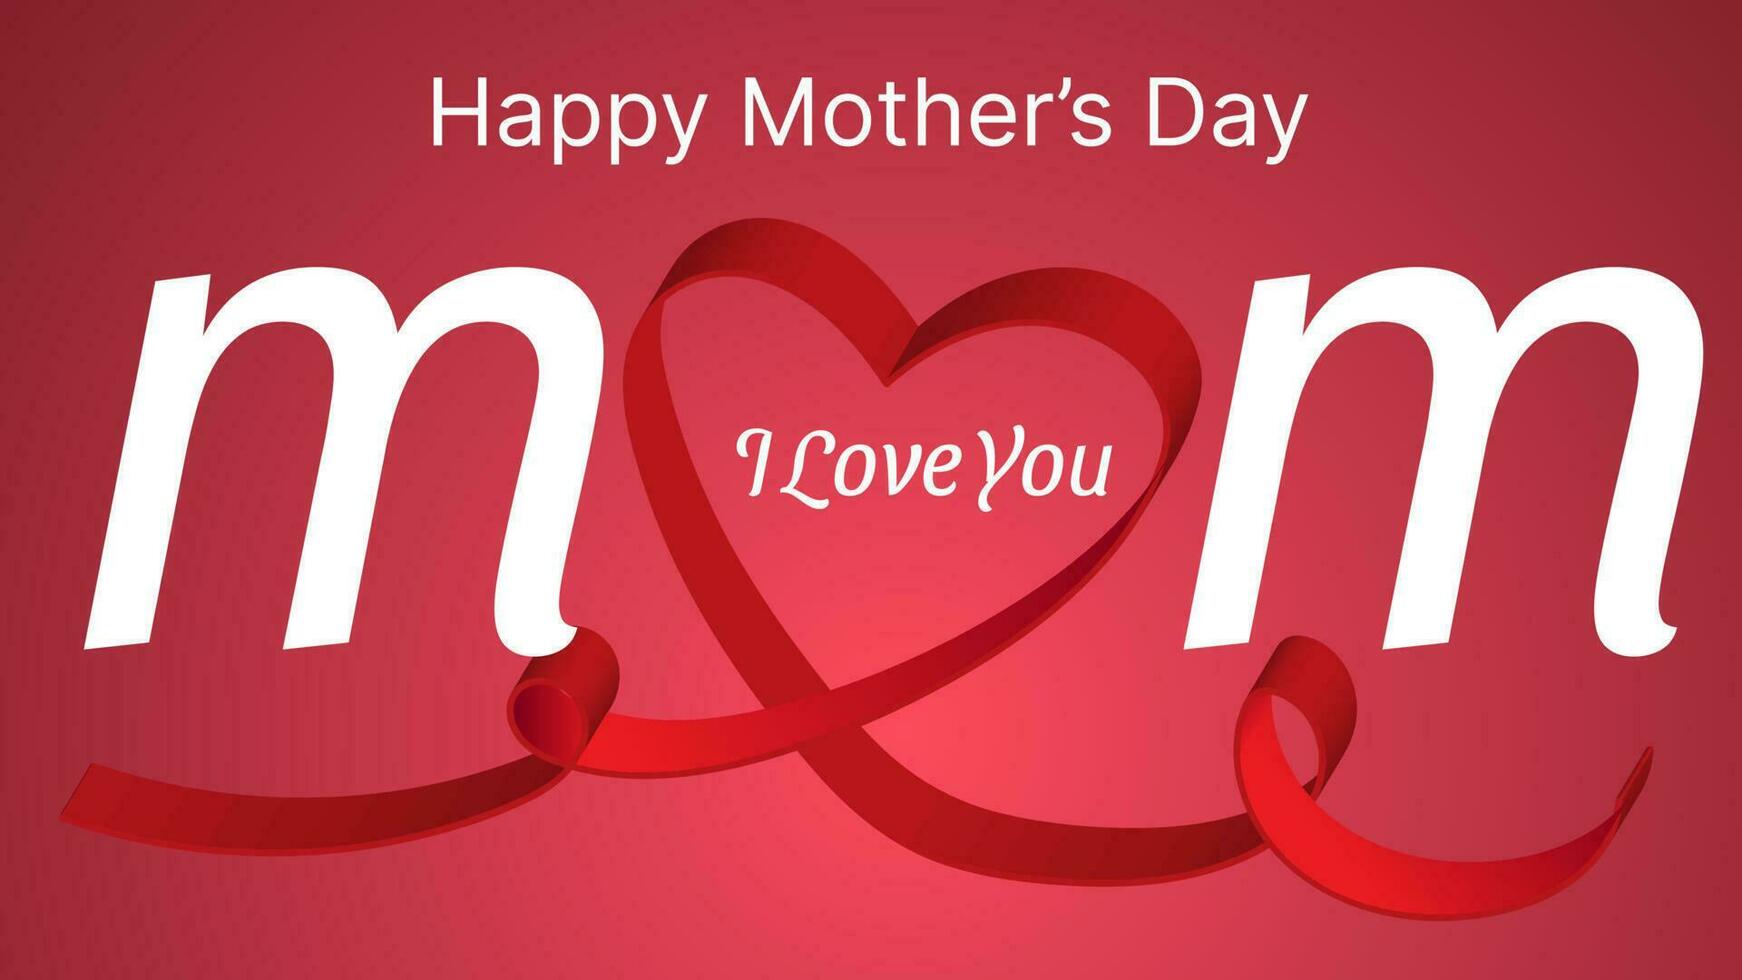 mother's day 3d realistic background illustration with red heart shaped ribbon vector